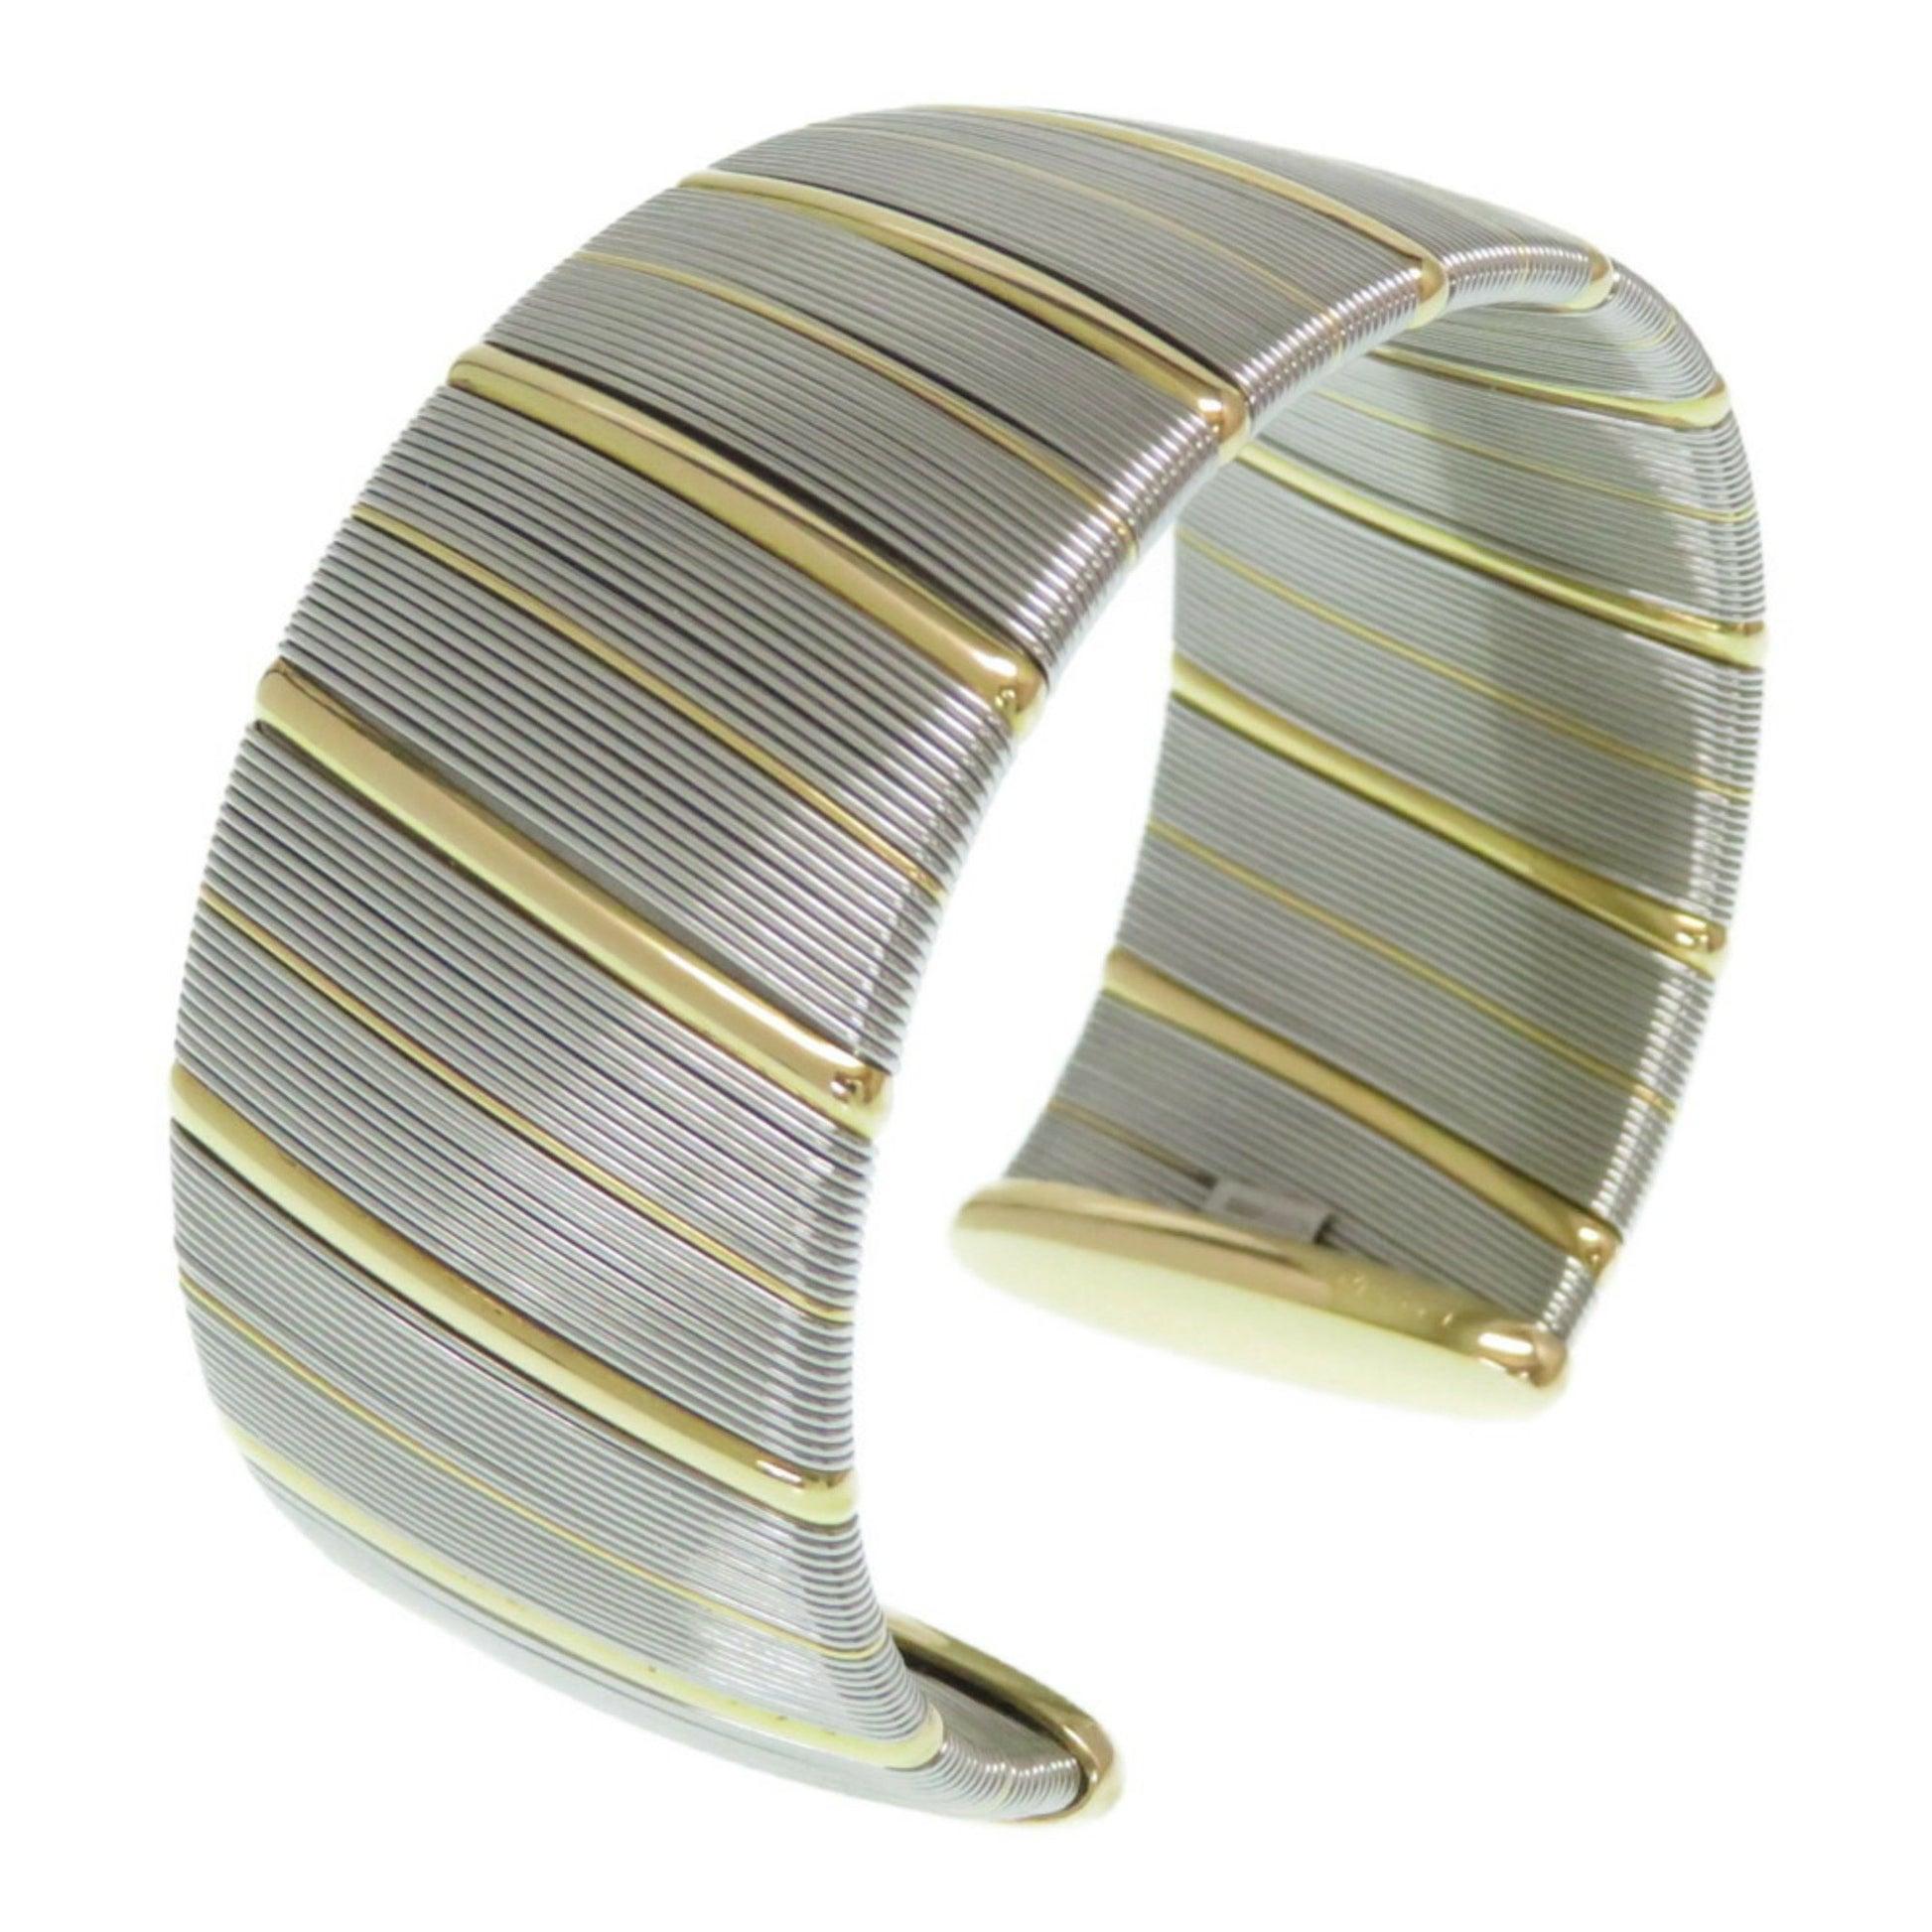 Cartier Antique Bangle in 18K Gold, Silver And Stainless Steel

Additional Information:
Brand: Cartier
Gender: Women
Model: antique
Material: Stainless steel, Yellow gold (18K)
Condition: Good
Condition details: The item has been used and has some